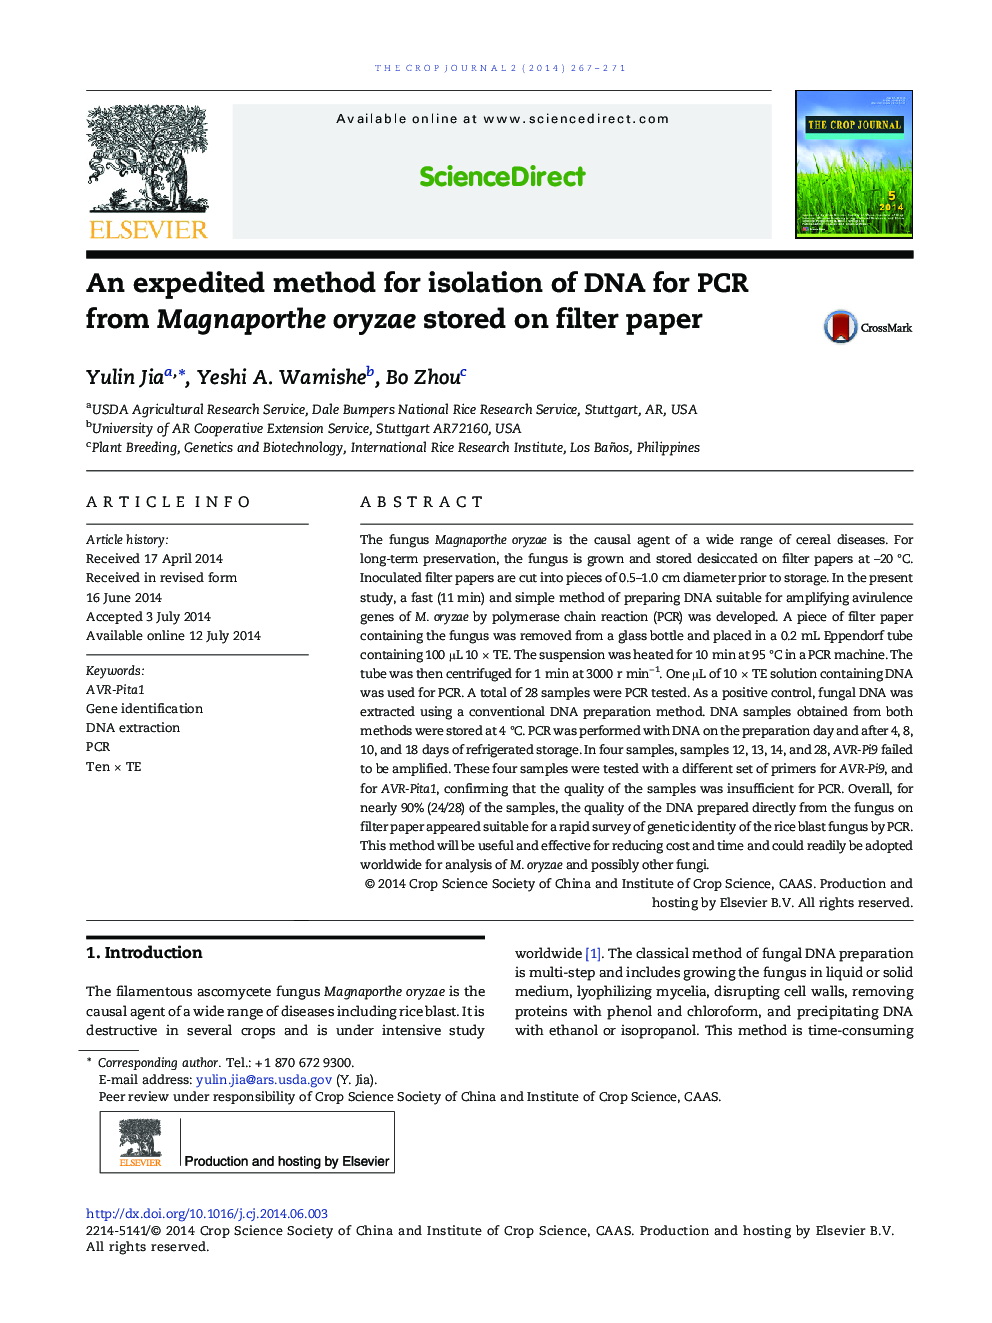 An expedited method for isolation of DNA for PCR from Magnaporthe oryzae stored on filter paper